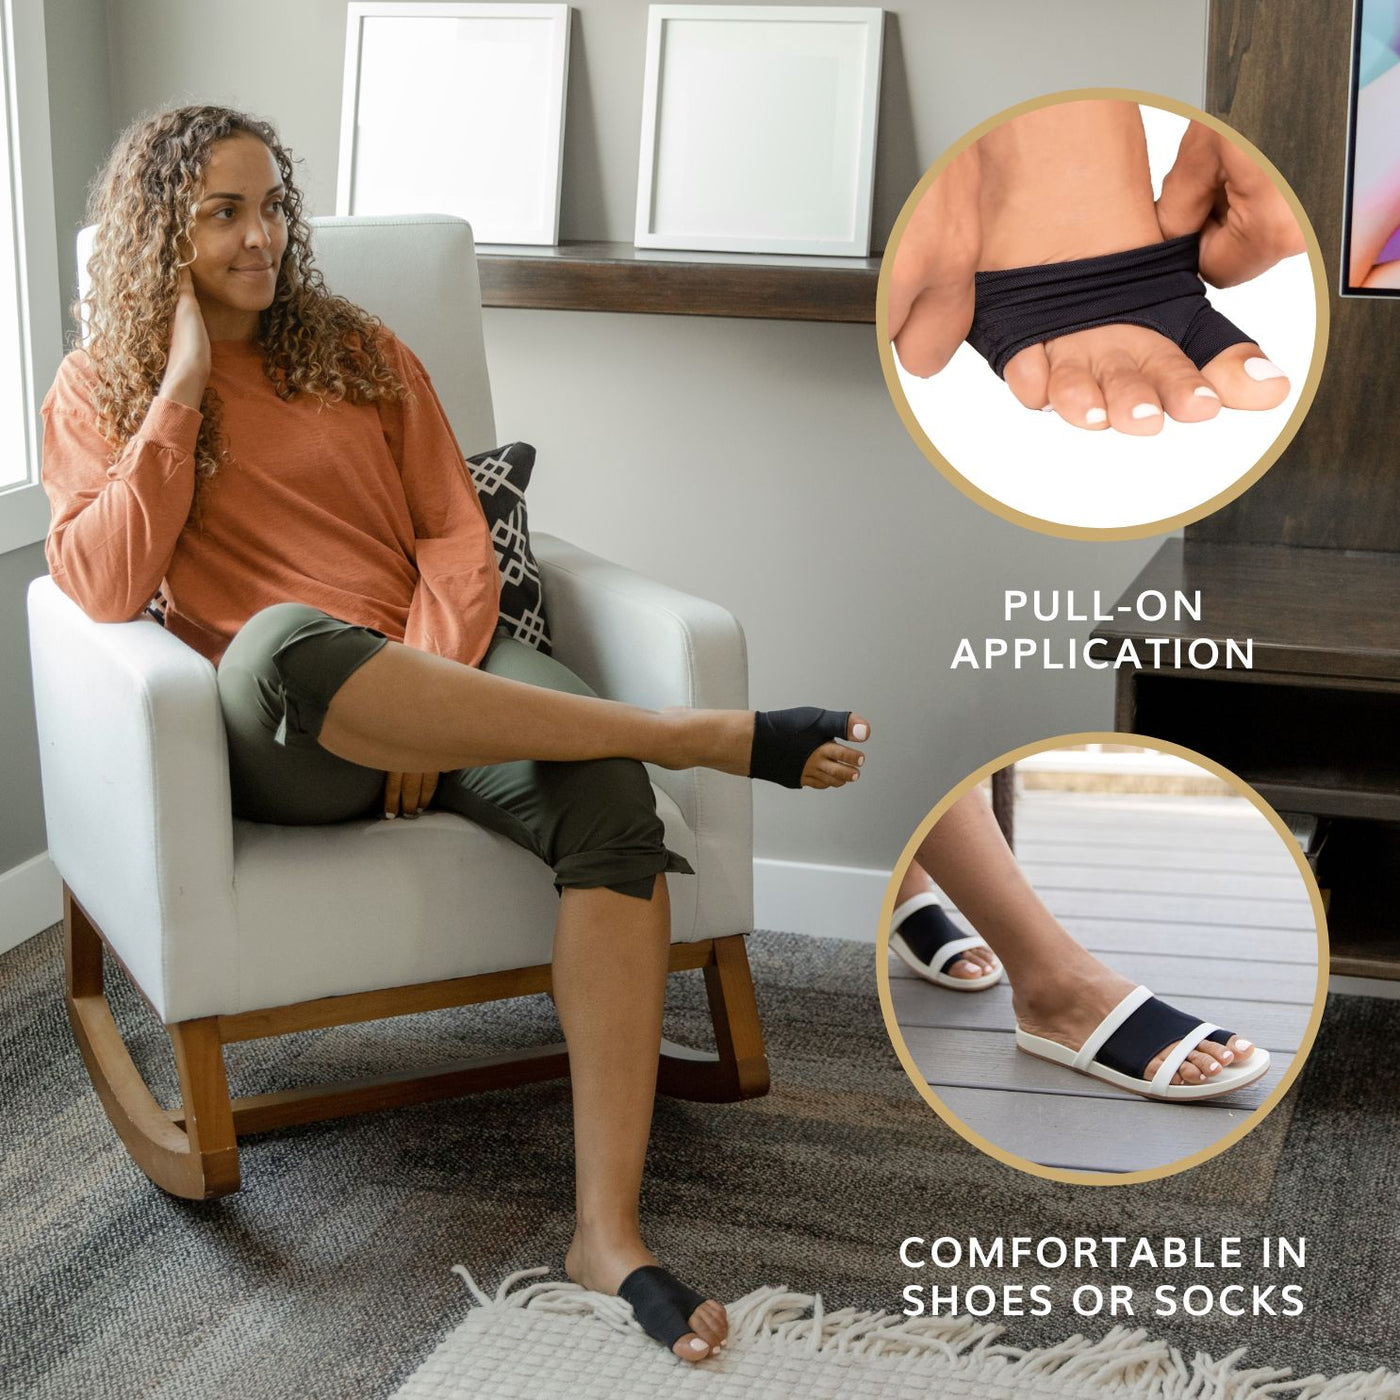 The bunion pain relief sleeve is a pull on application that can be worn in socks or shoes